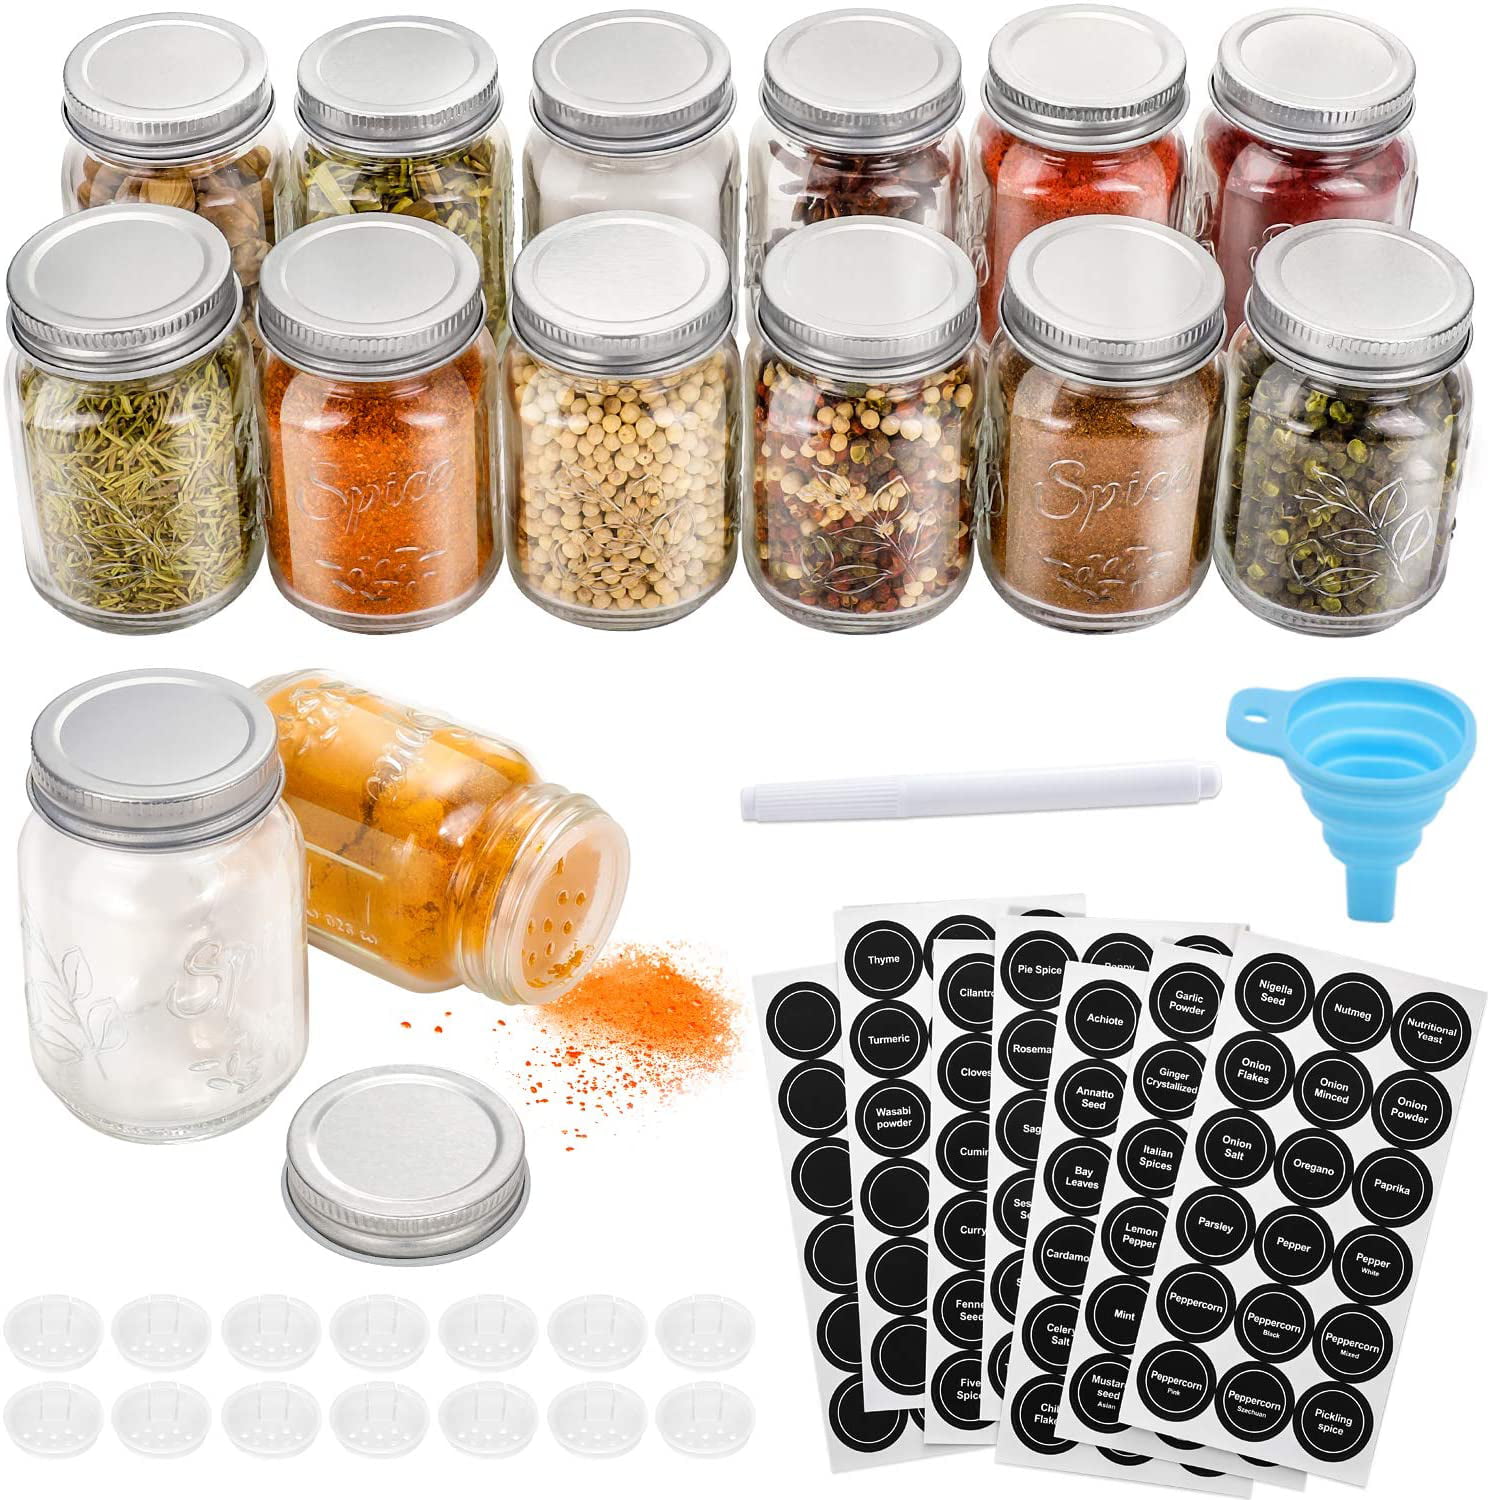 Churboro 36 Spice Jars with 547 Labels- Glass Spice Jars with Black Metal  Caps, 4oz Empty Spice Containers with Shaker Lids, Funnel, Chalk Pen,  Square